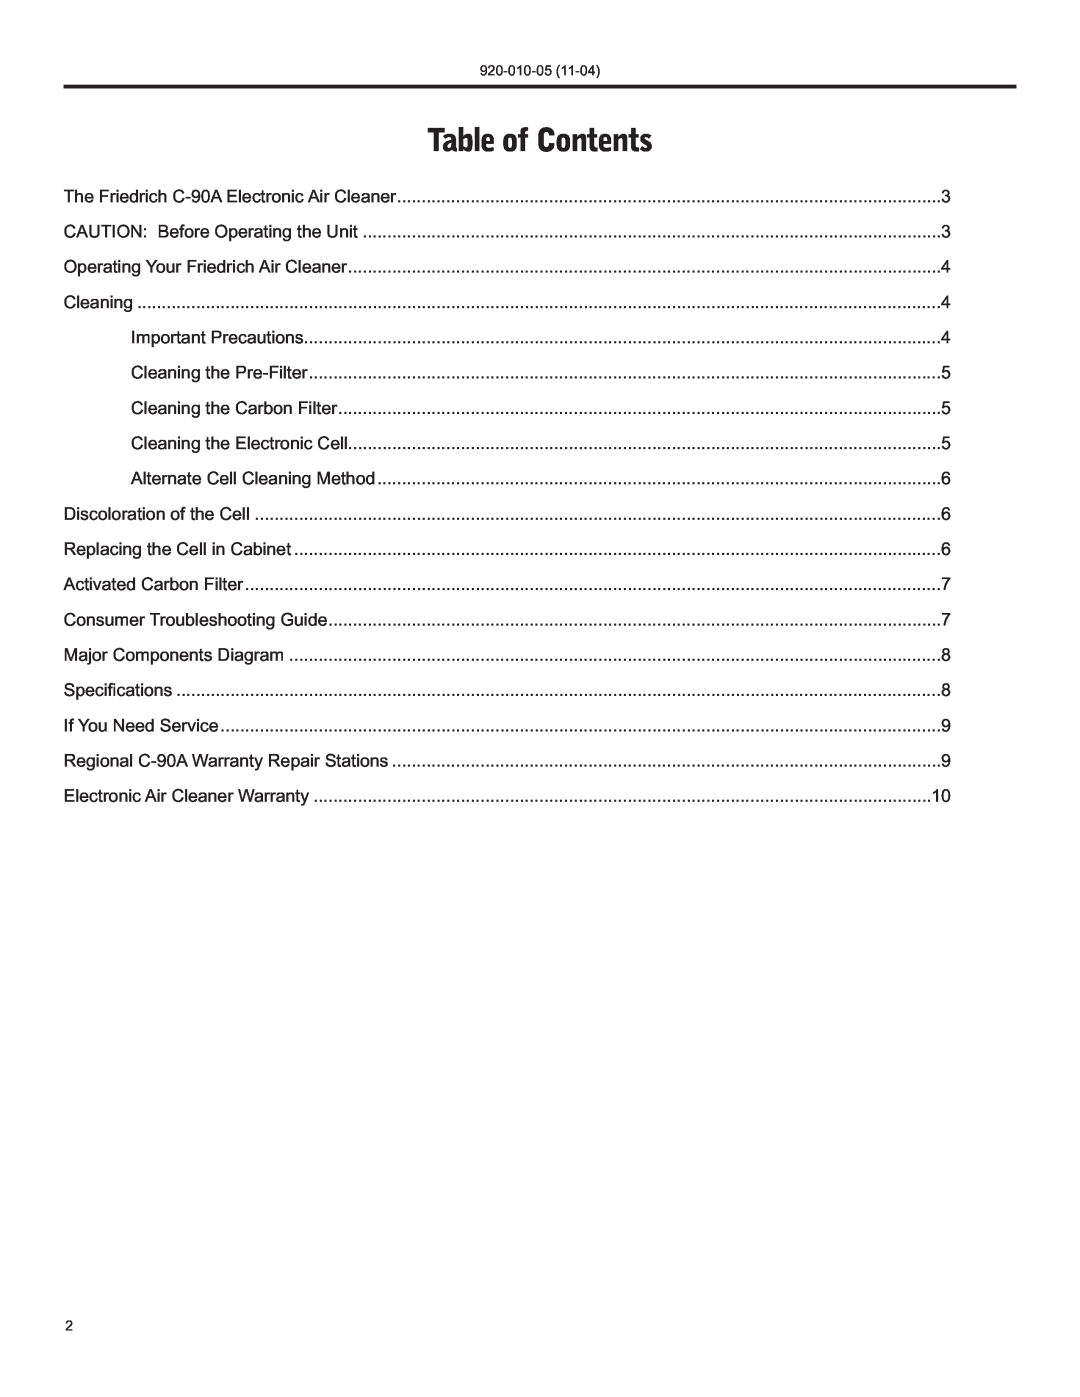 Nilfisk-ALTO C-90A manual Table of Contents 